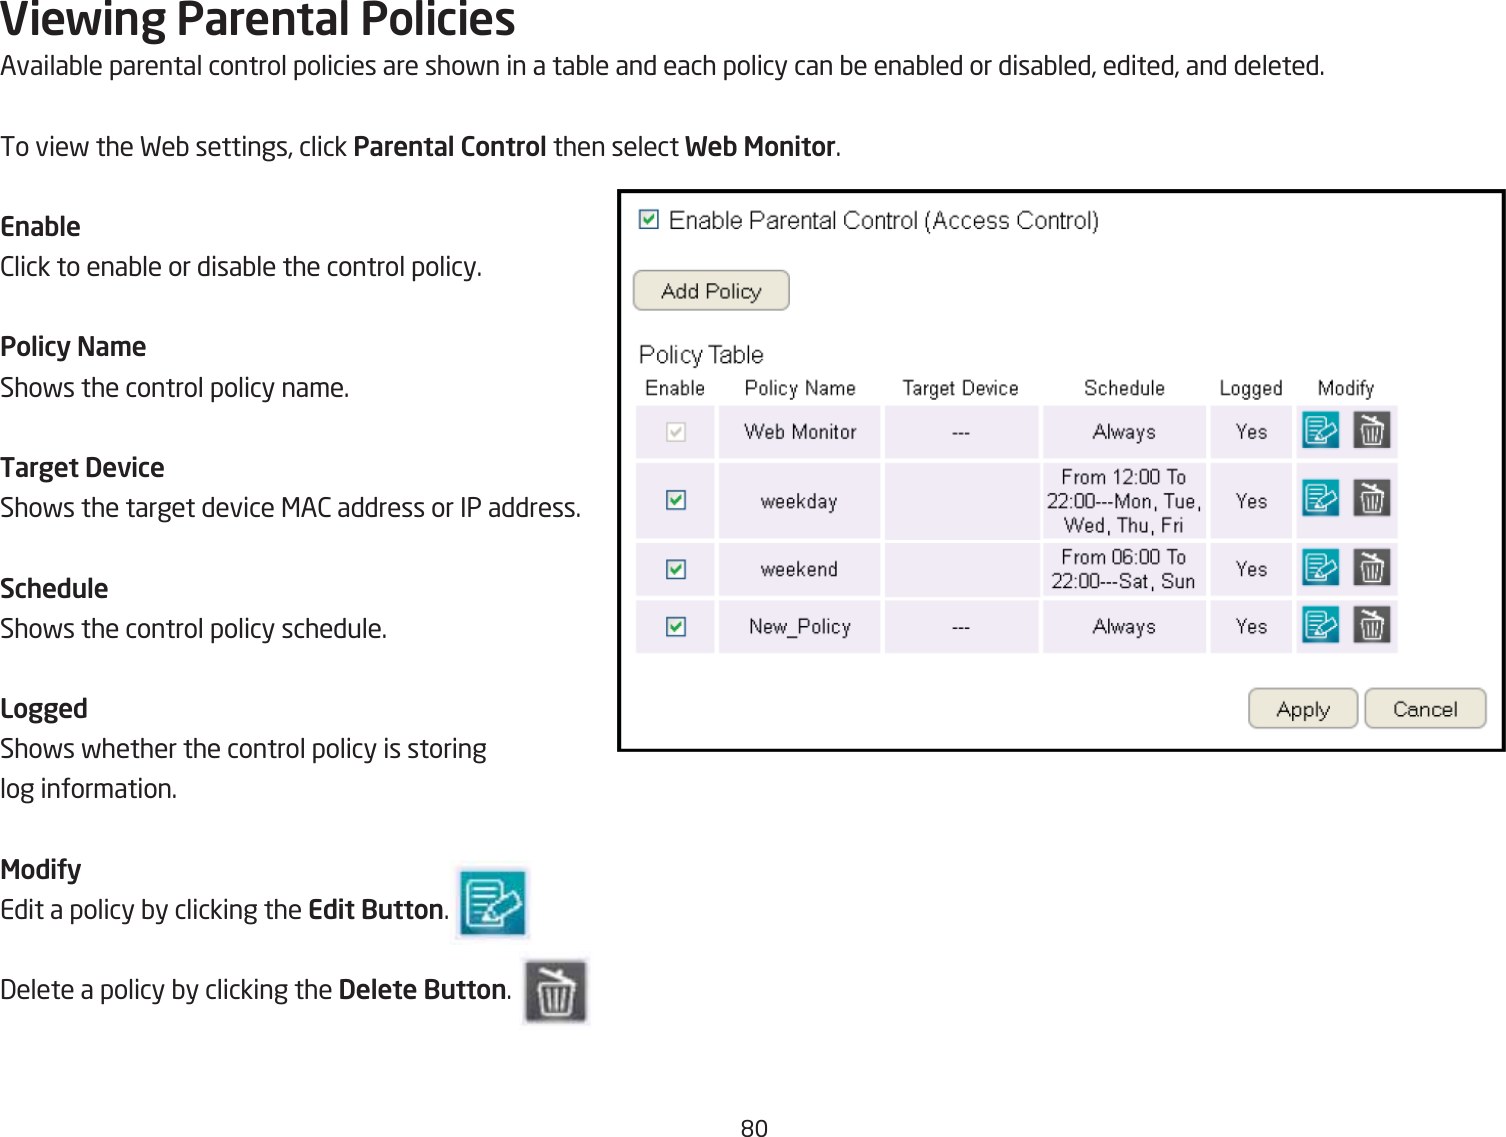 &apos;Viewing Parental PoliciesAvailaQle parental control policies are shofn in a taQle and each policy can Qe enaQled or disaQled, edited, and deleted.To vief the FeQ settings, click Parental Control then select Web Monitor.Enable2lick to enaQle or disaQle the control policy.Policy Na\eShofs the control policy name.Target DeviceShofs the target device &lt;A2 address or IP address.ScheduleShofs the control policy schedule.LoggedShofs fhether the control policy is storing log information.ModiUyEdit a policy Qy clicking the Edit Button. 3elete a policy Qy clicking the Delete Button.